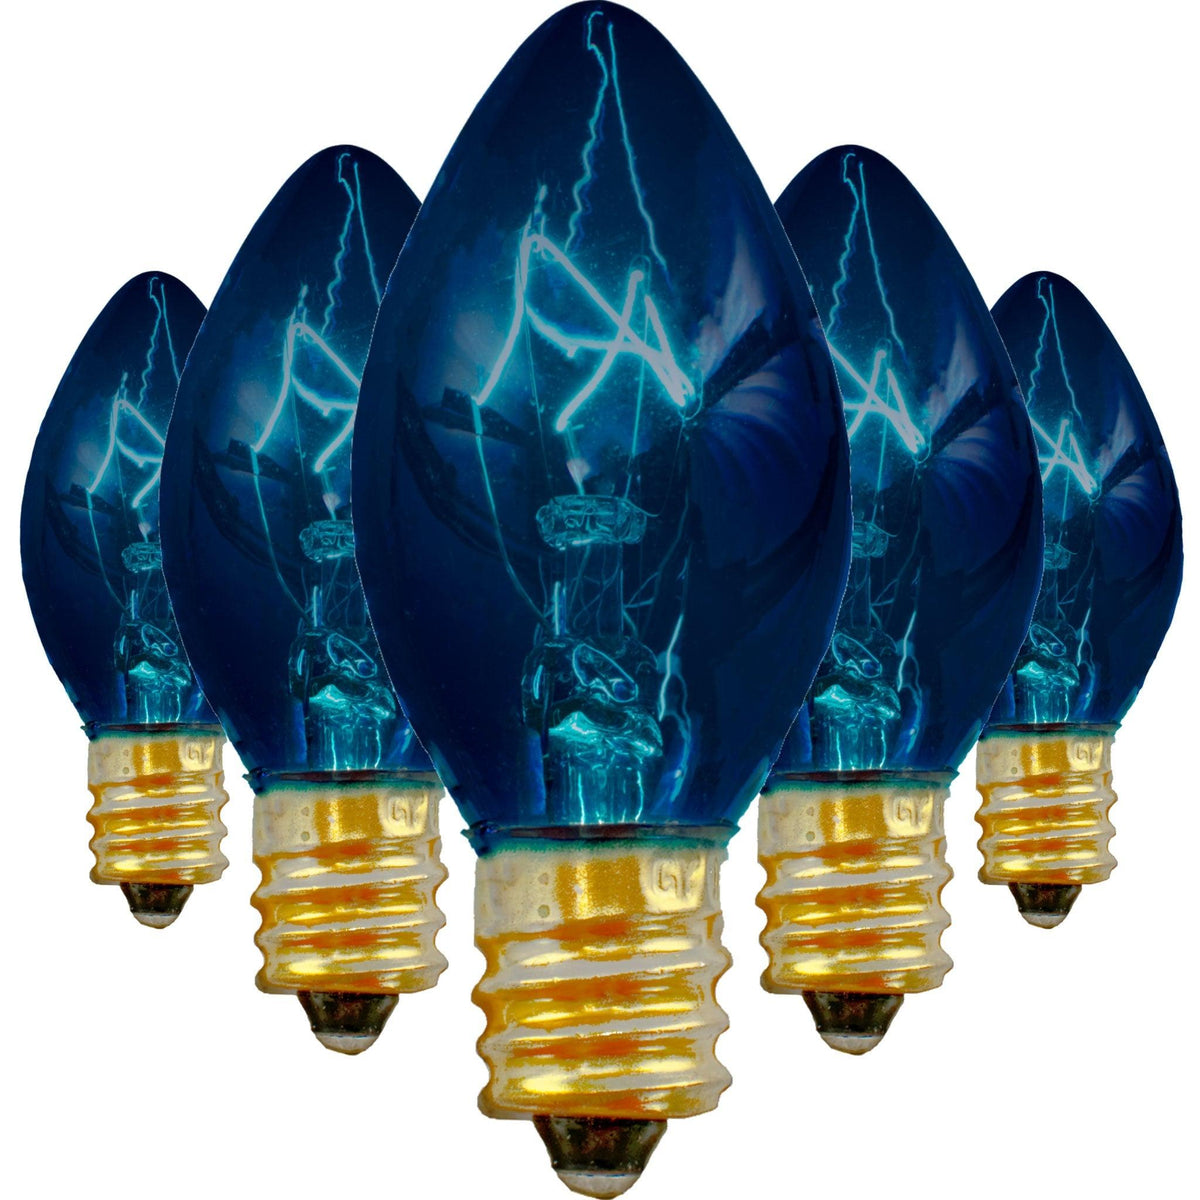 C-7 & C-9 Transparent Blue Christmas Light Bulbs.  Replace your old bulbs with a set of brand new Candelabra Lights.  Shop now at leedisplay.com